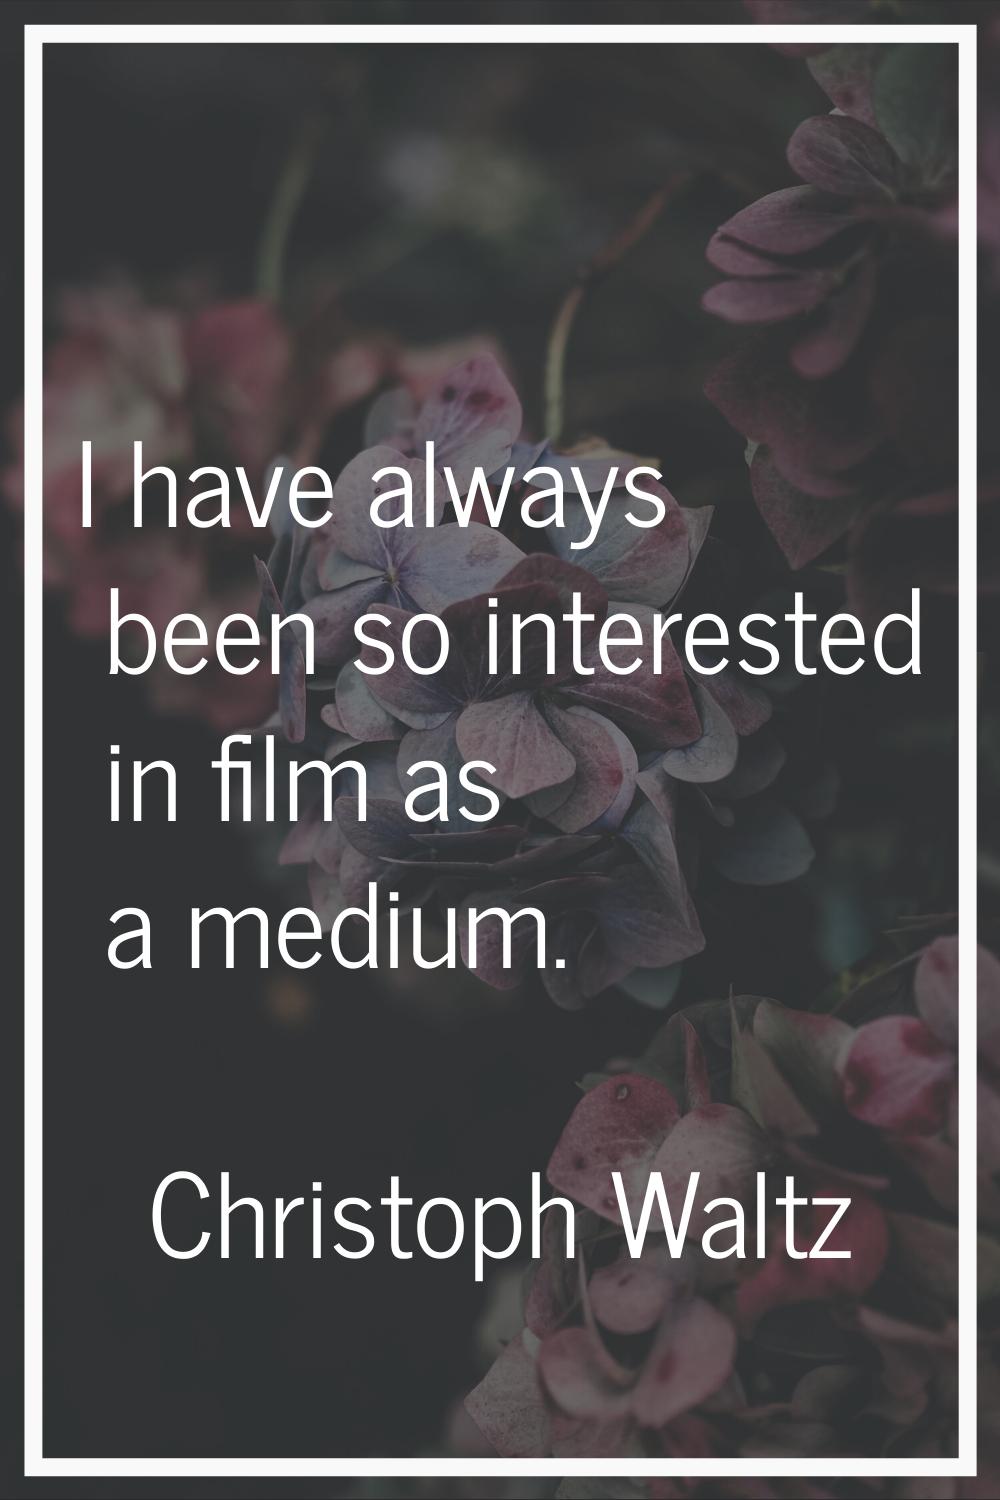 I have always been so interested in film as a medium.